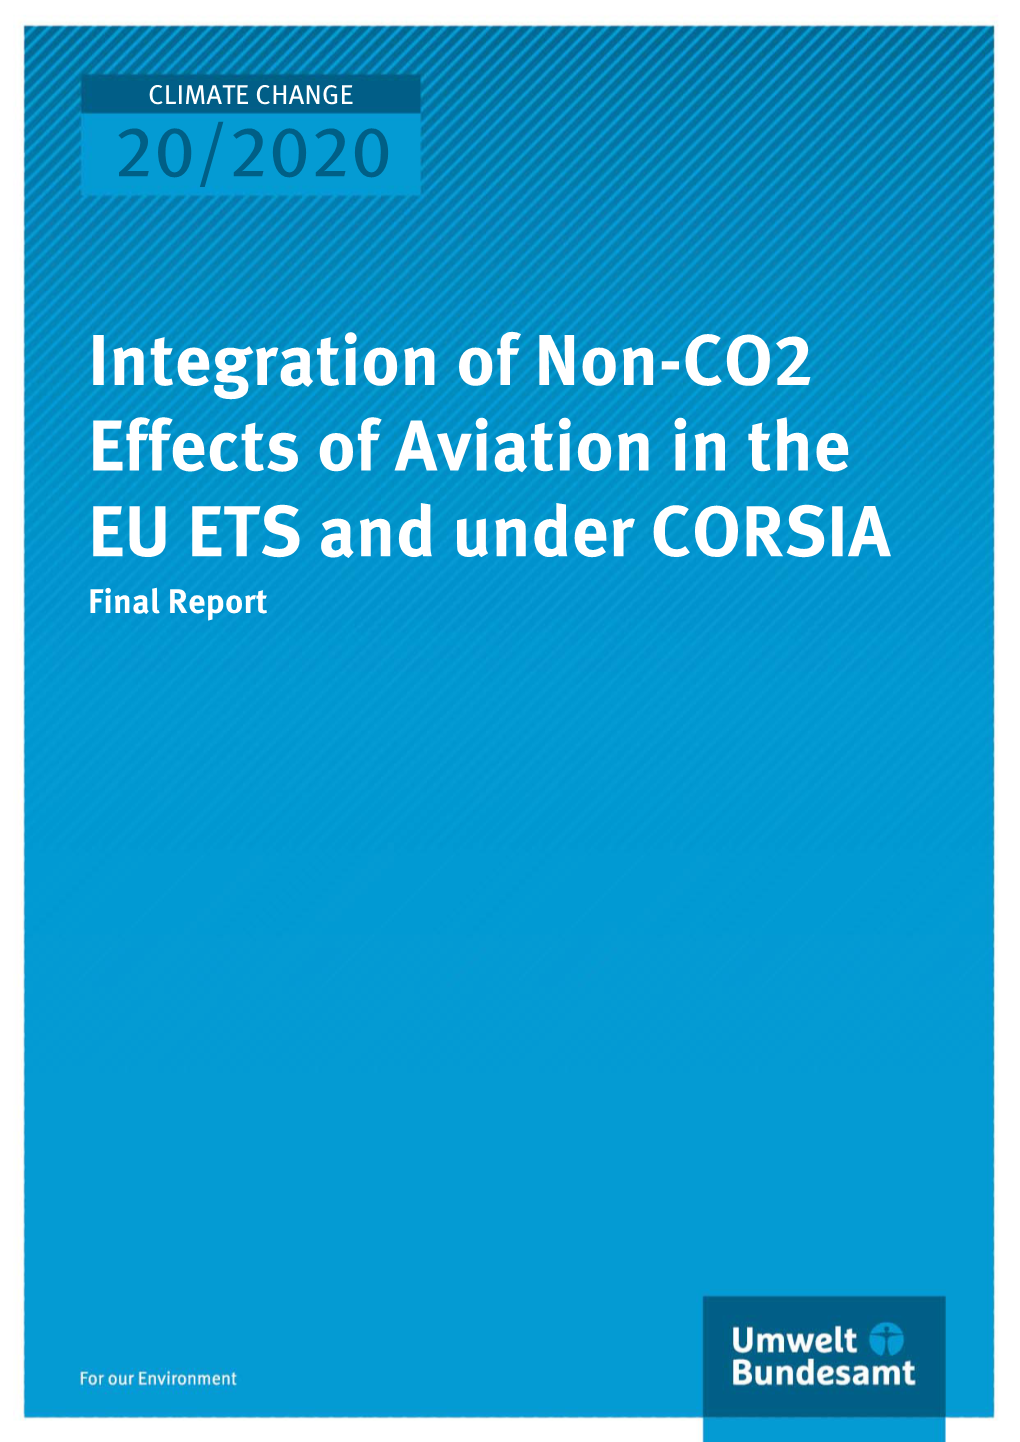 Integration of Non-CO2 Effects of Aviation in EU-ETS and Under